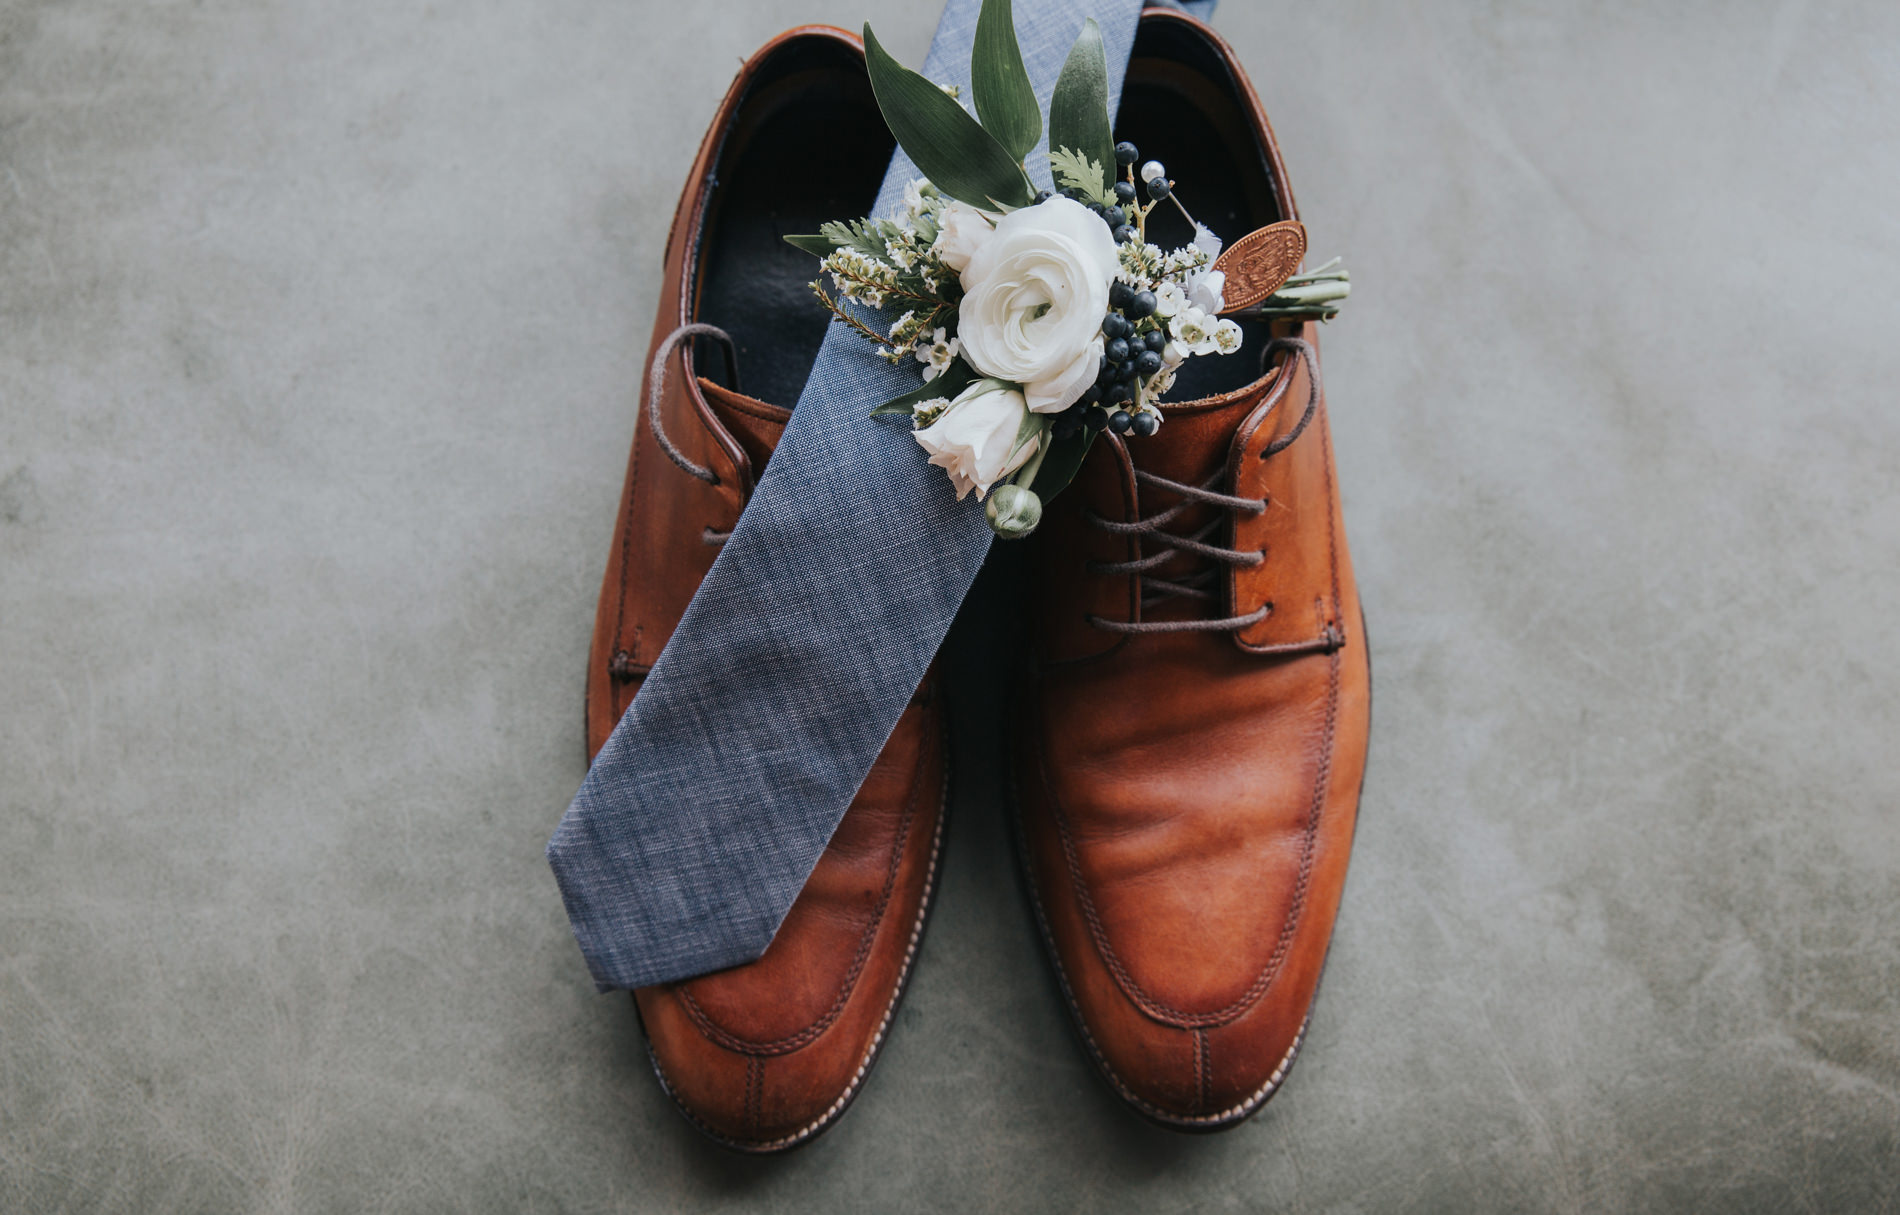  maine groom shoes and tie wedding 